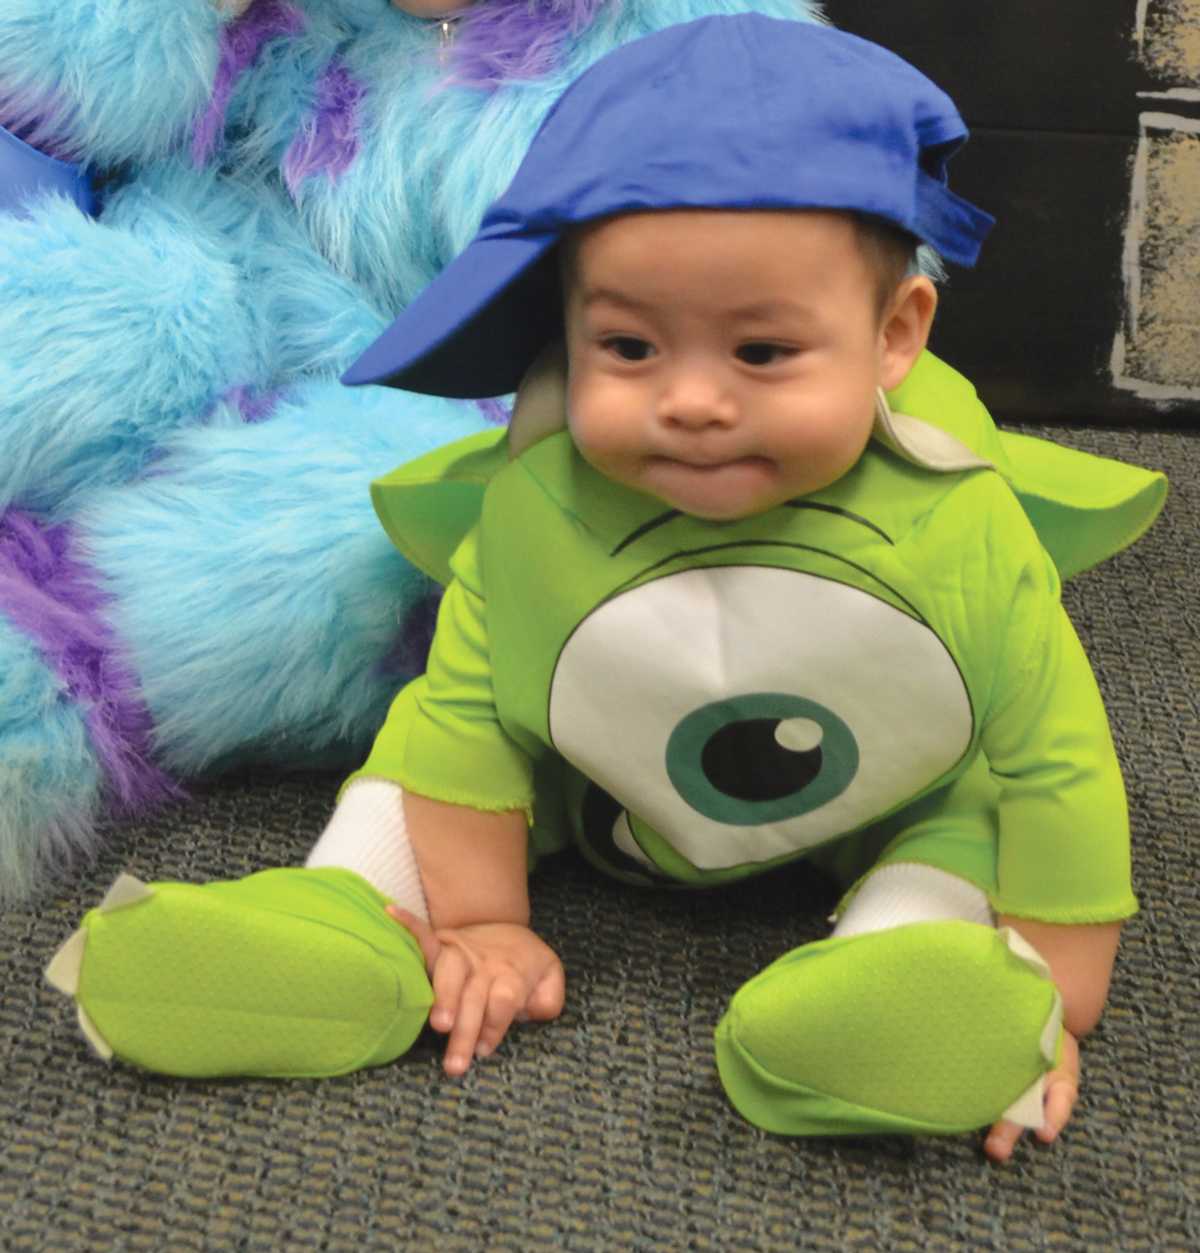 Crusader photo/Jose Medrano

The Gomez brothers of 4 years and of 9 months dressed up as Sully and Mike from Monster Inc won the Crusader’s contest by having the most votes on Facebook.